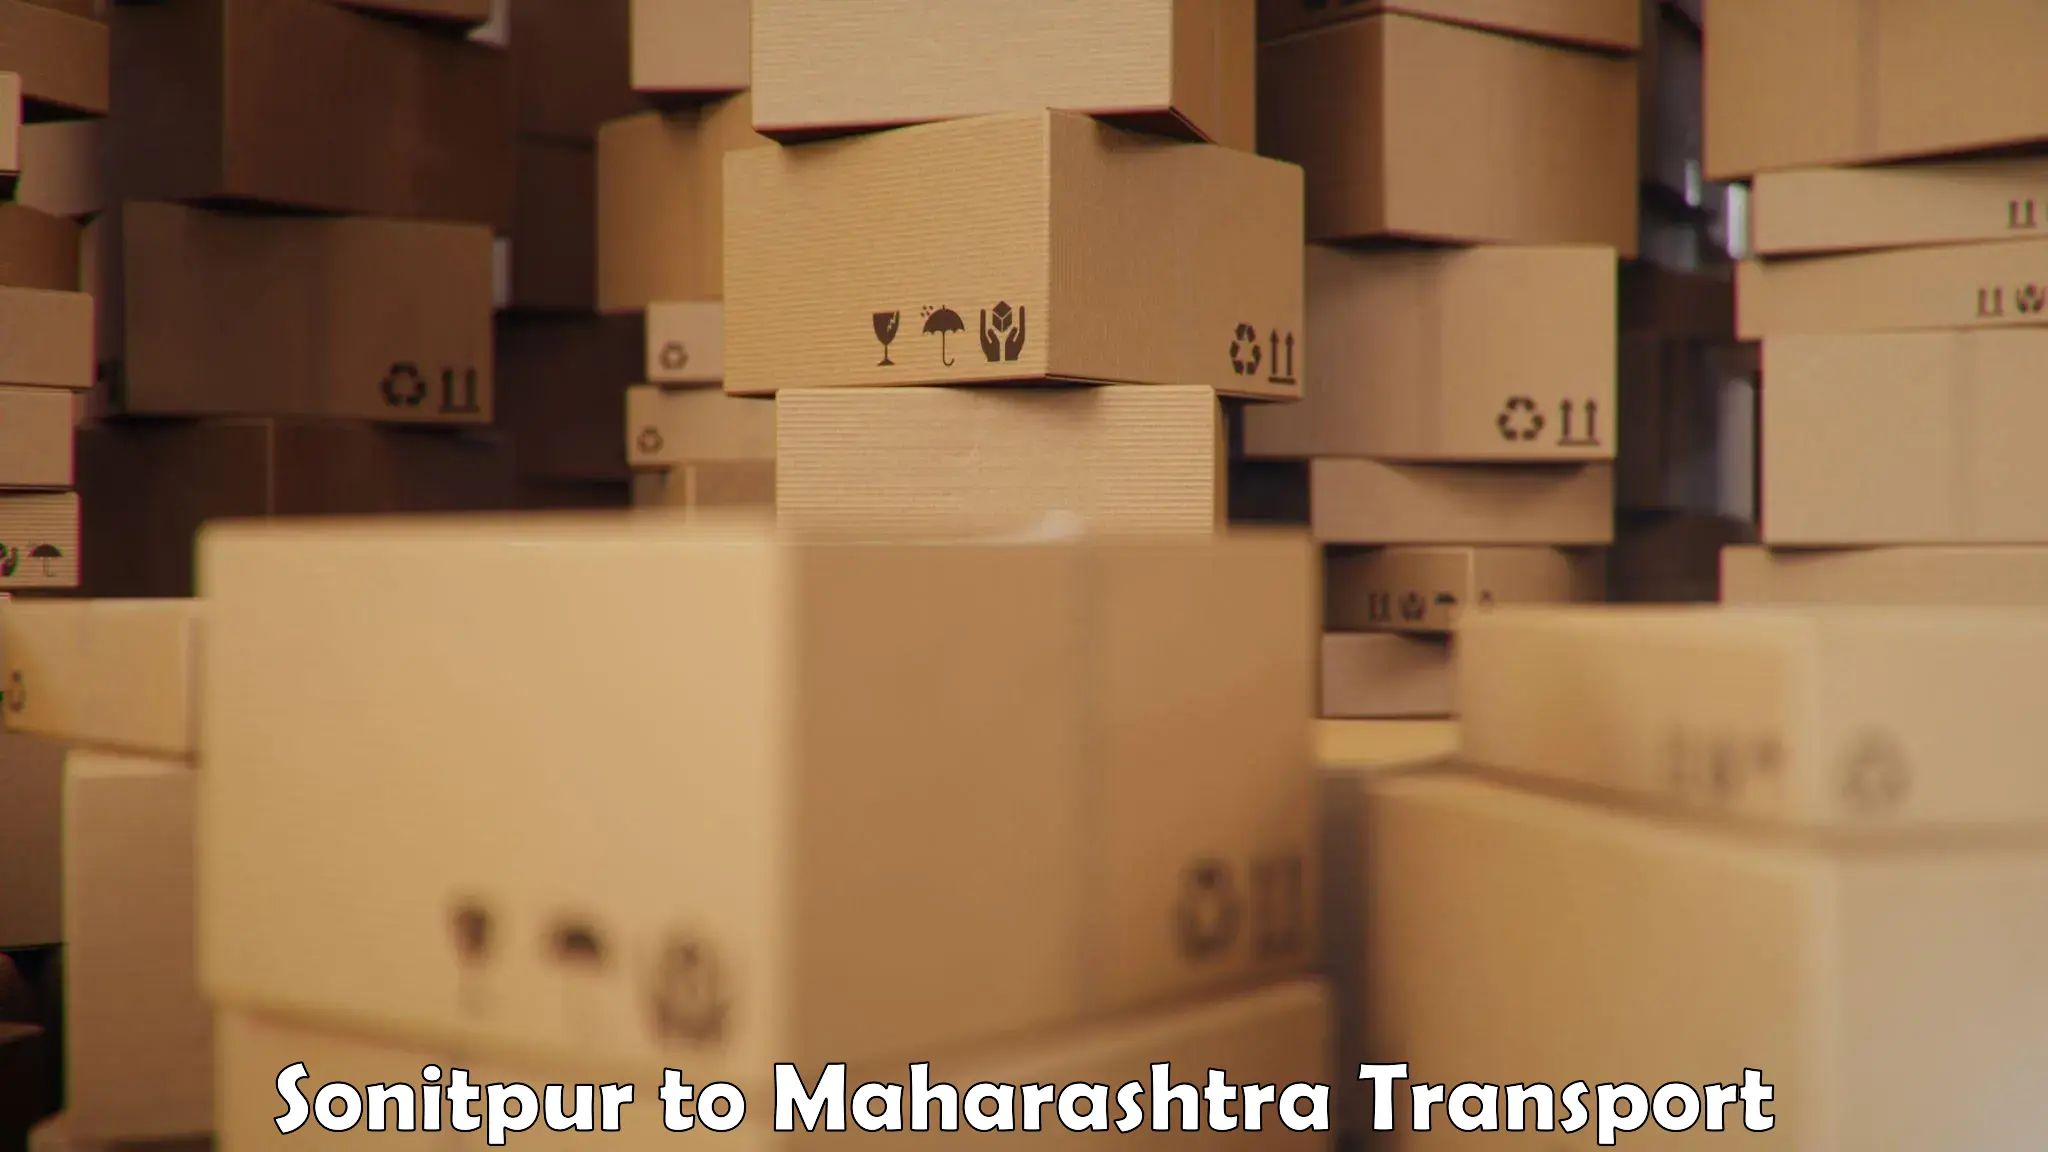 Air freight transport services Sonitpur to Alephata